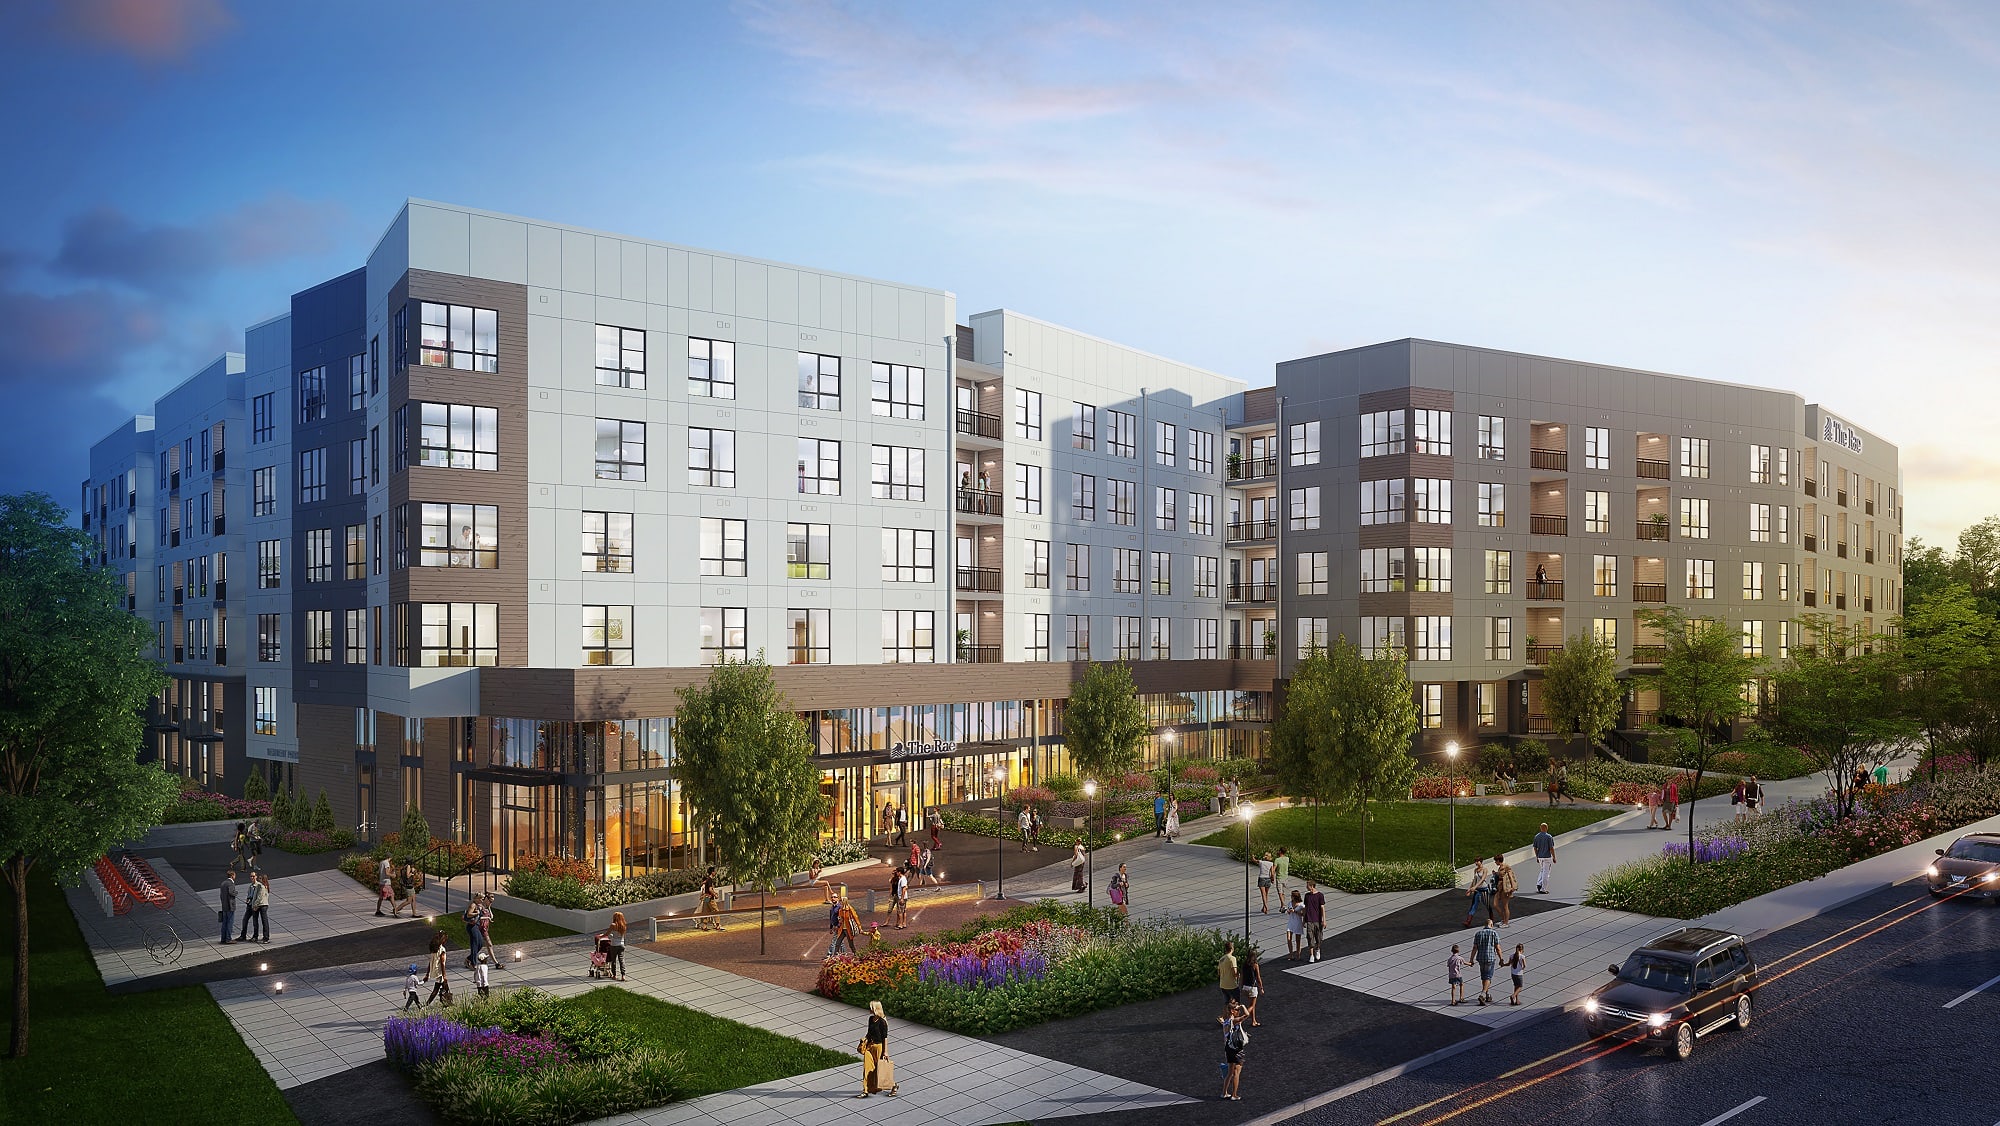 Recent development projects in the Bethesda area